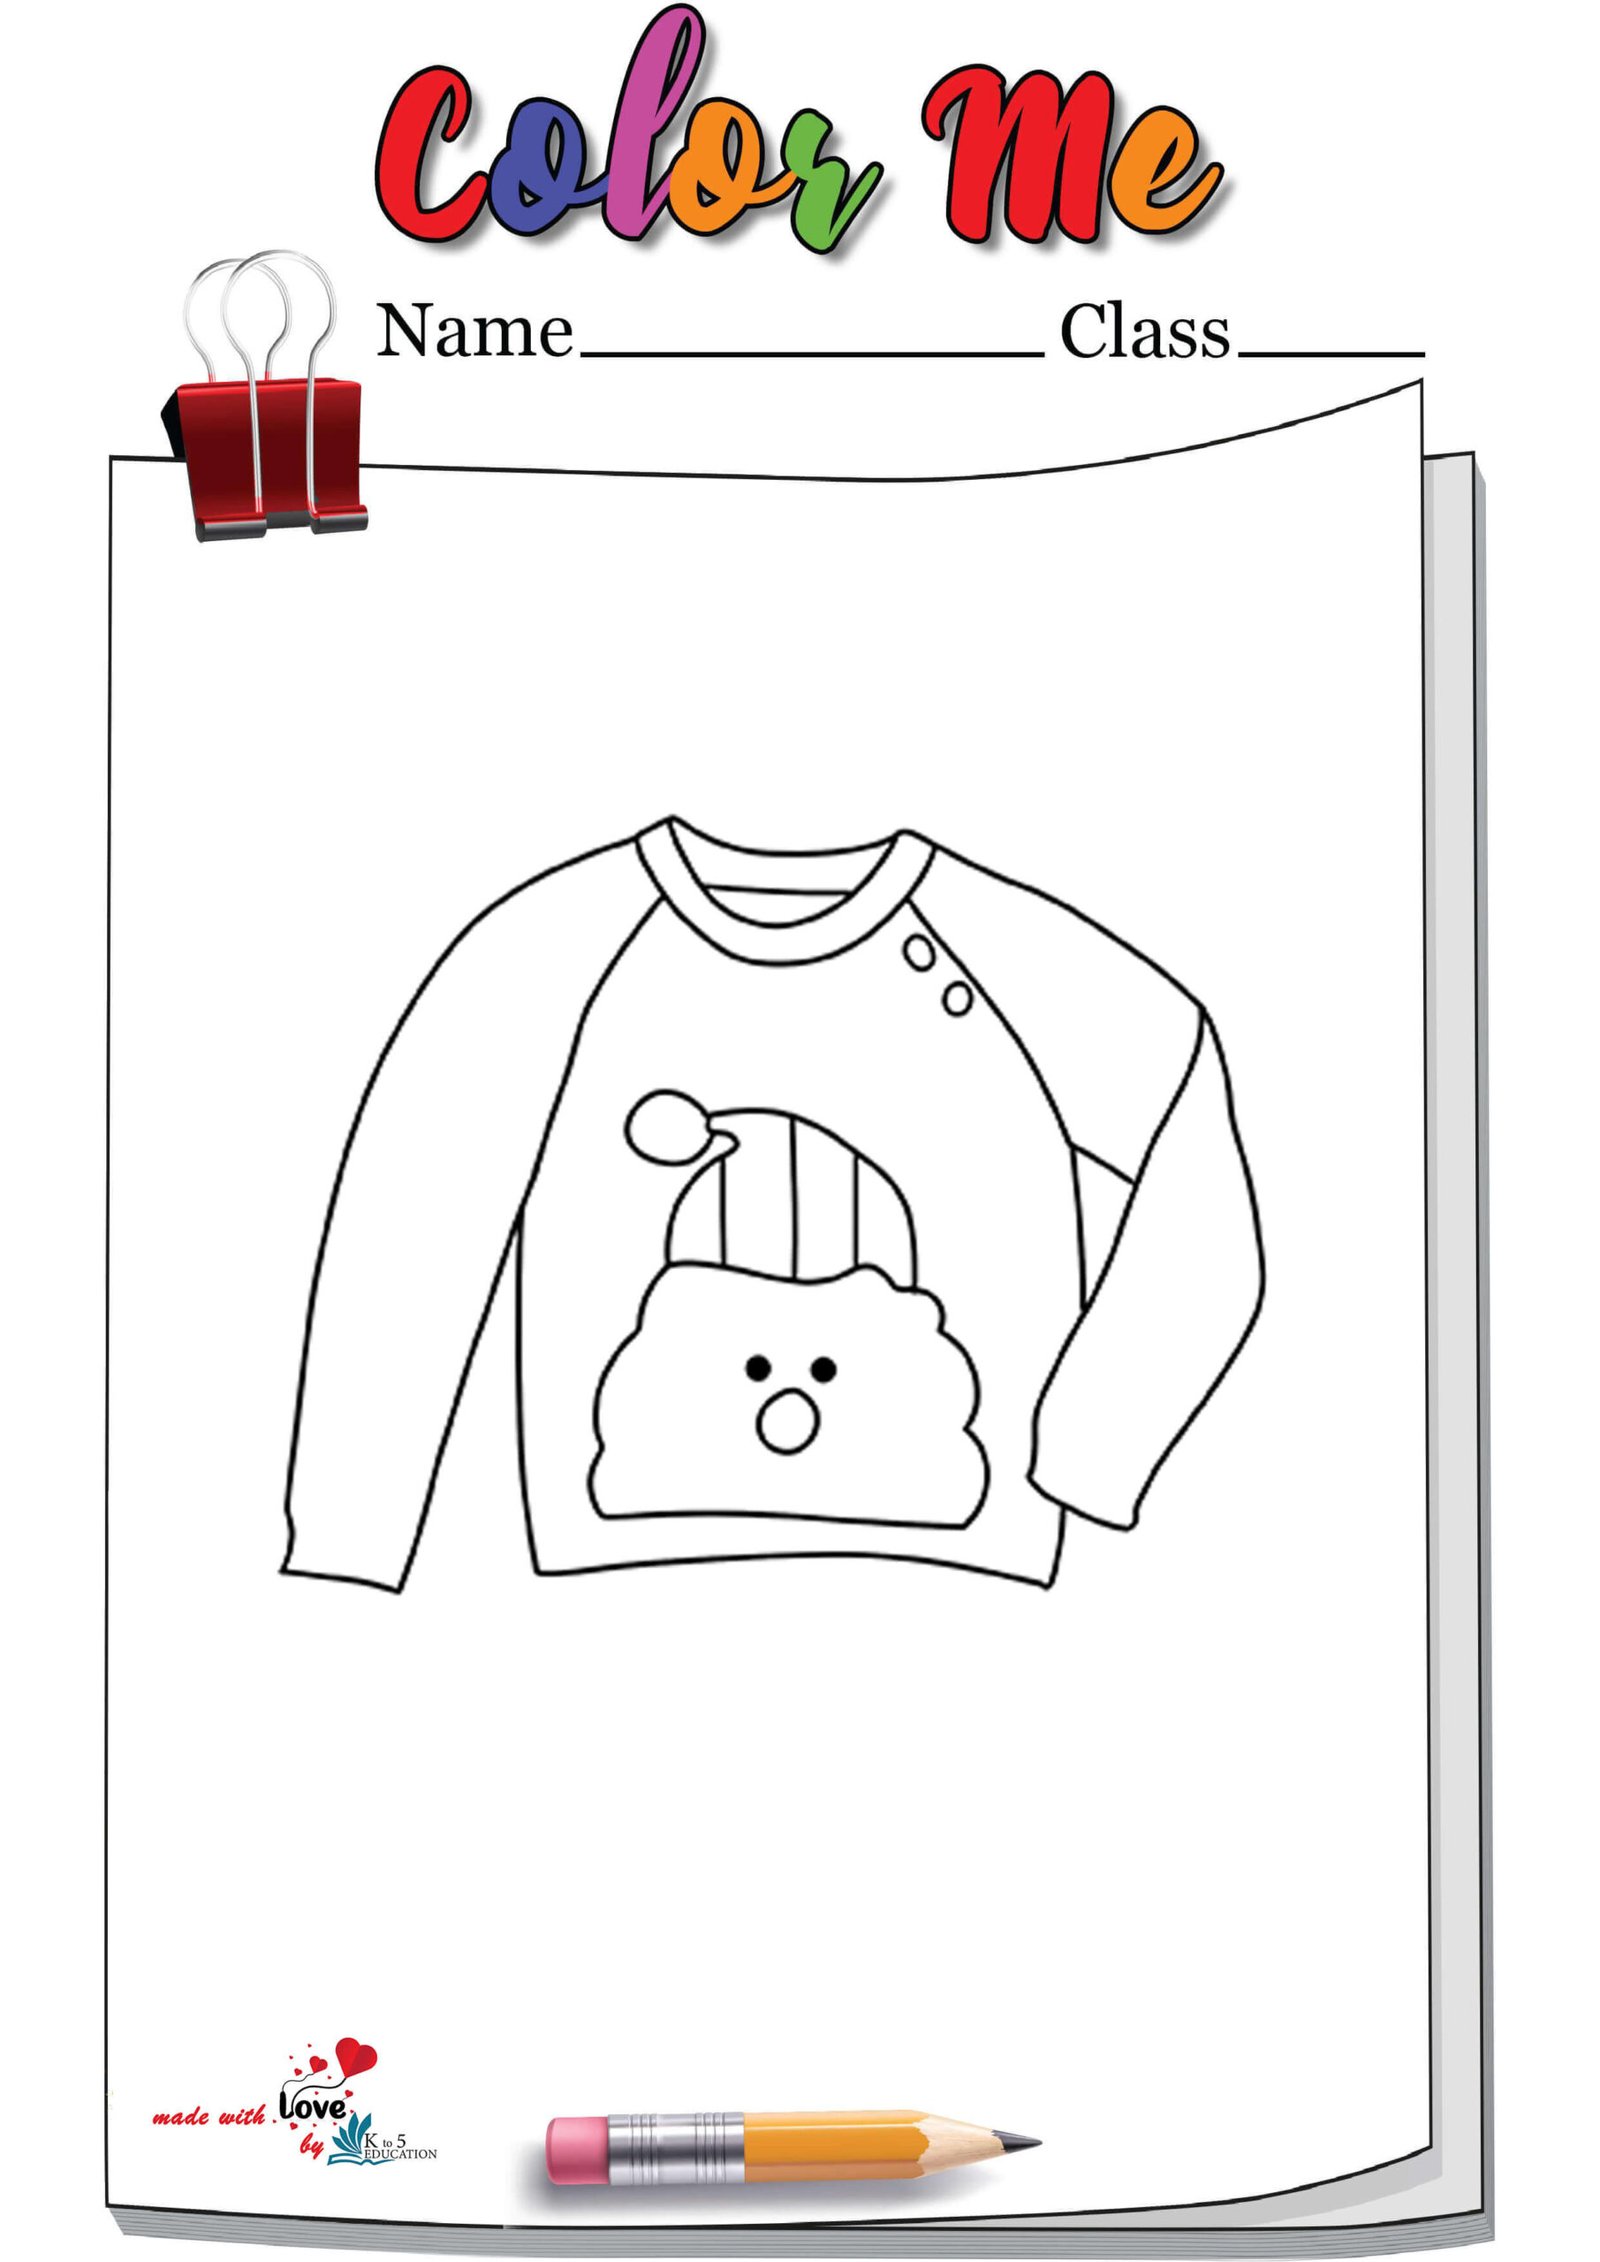 Sweater Coloring Page